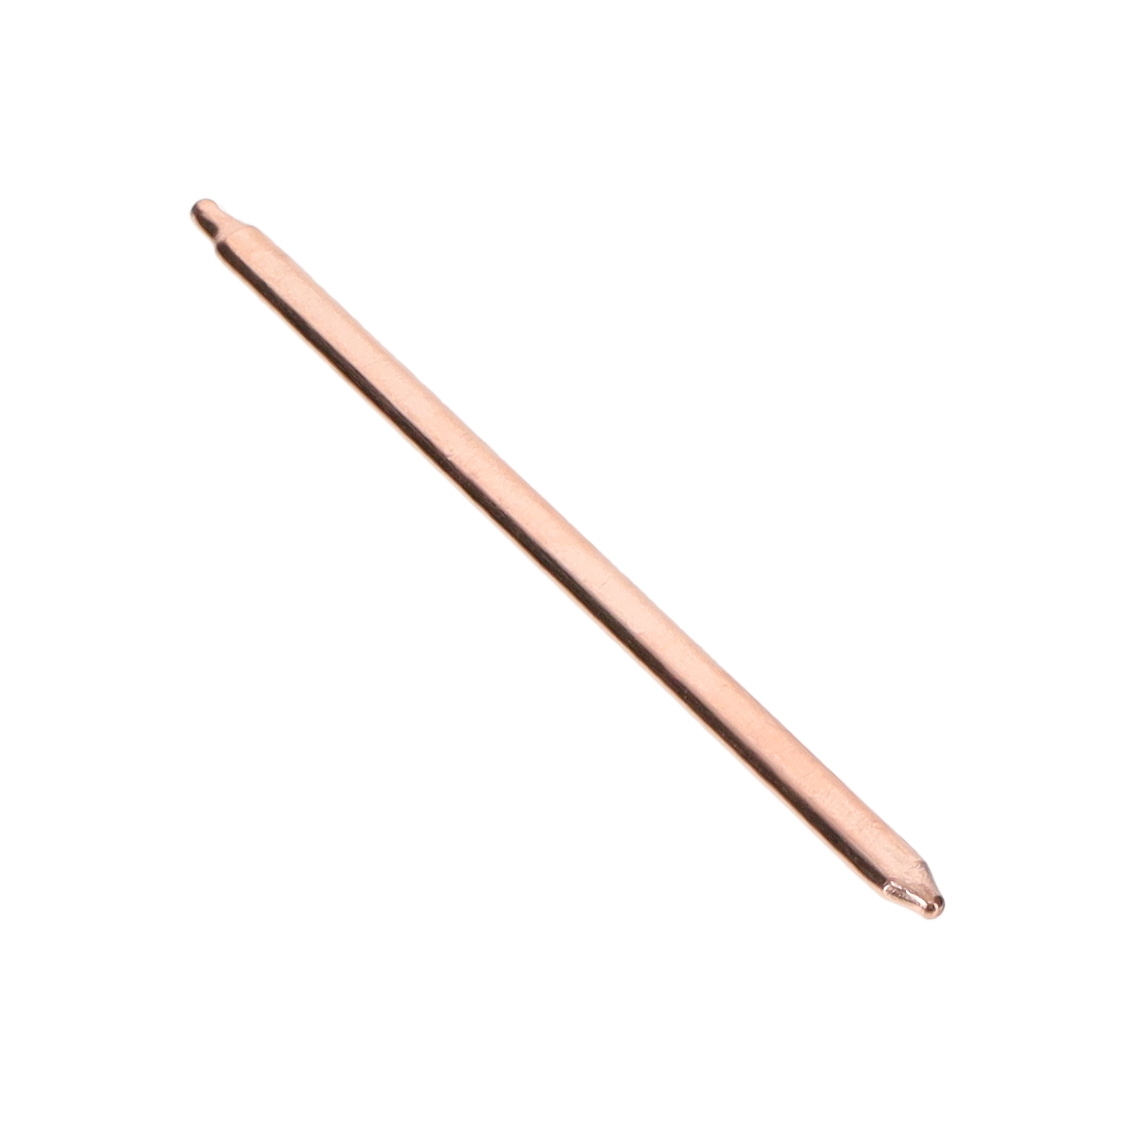 【HP-CWS-F04X25-100-N】COPPER-WATER HEAT PIPE, FLAT, LE